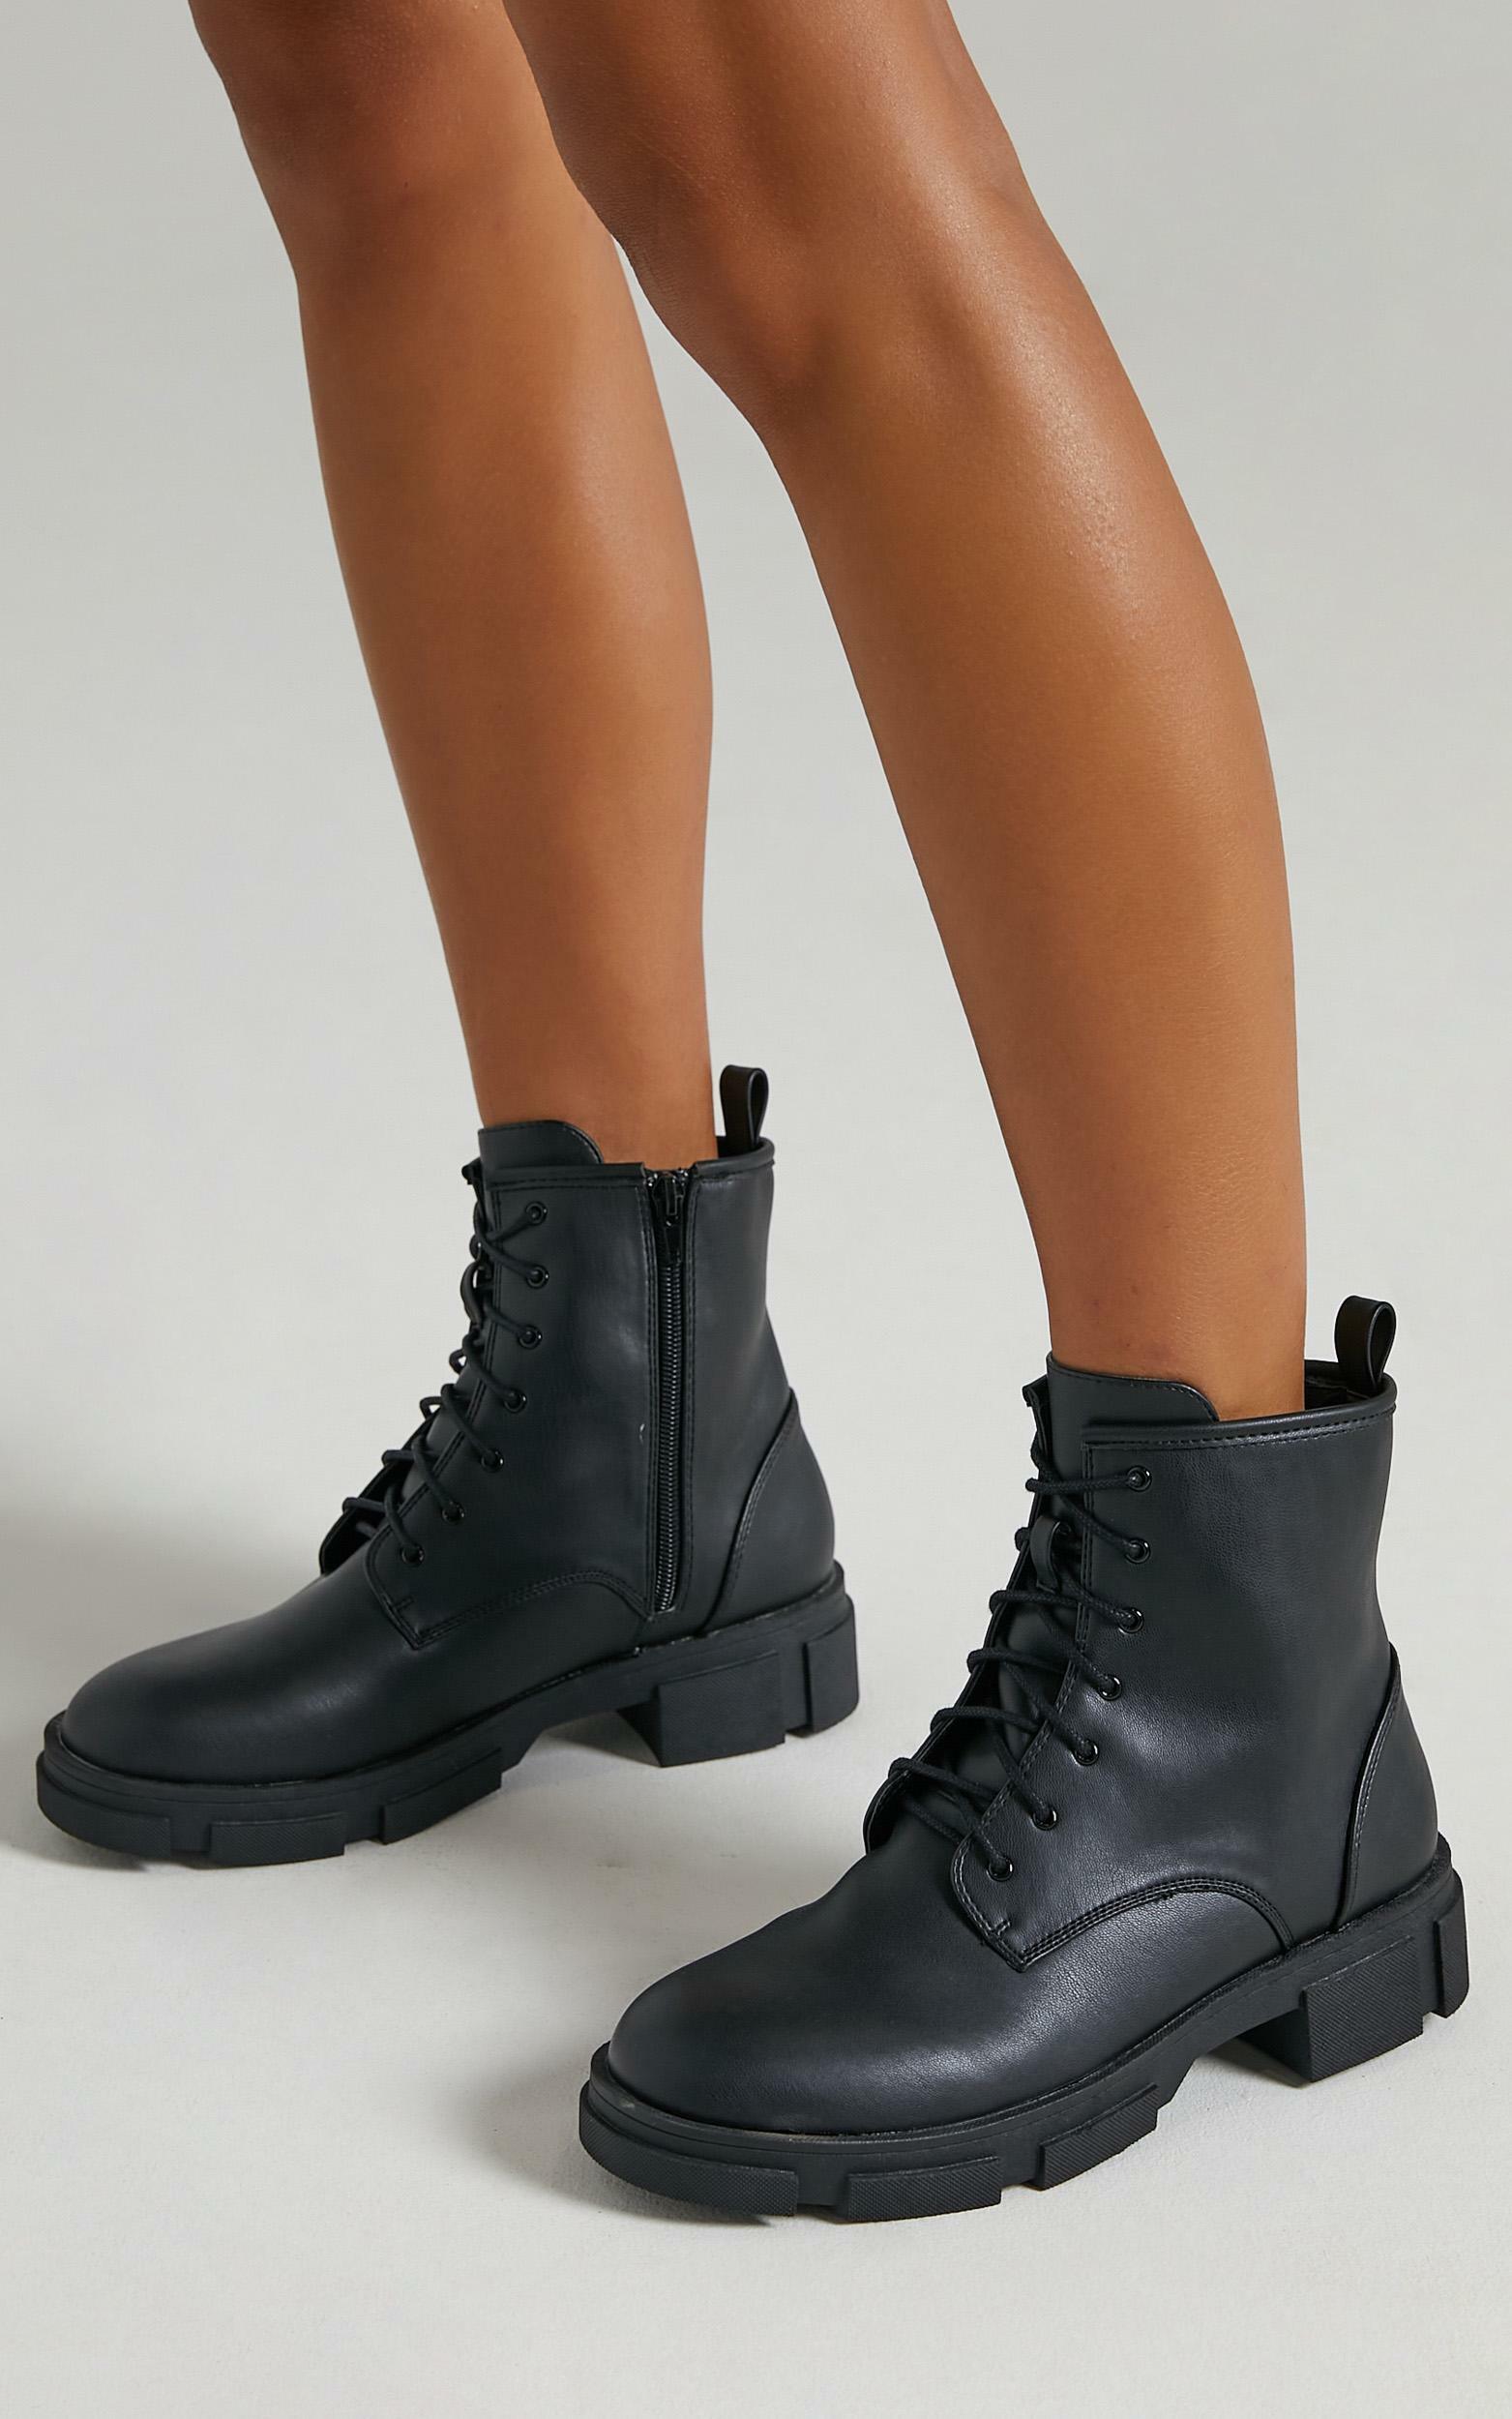 Therapy - Nadia Boots in Black - 05, BLK1, hi-res image number null